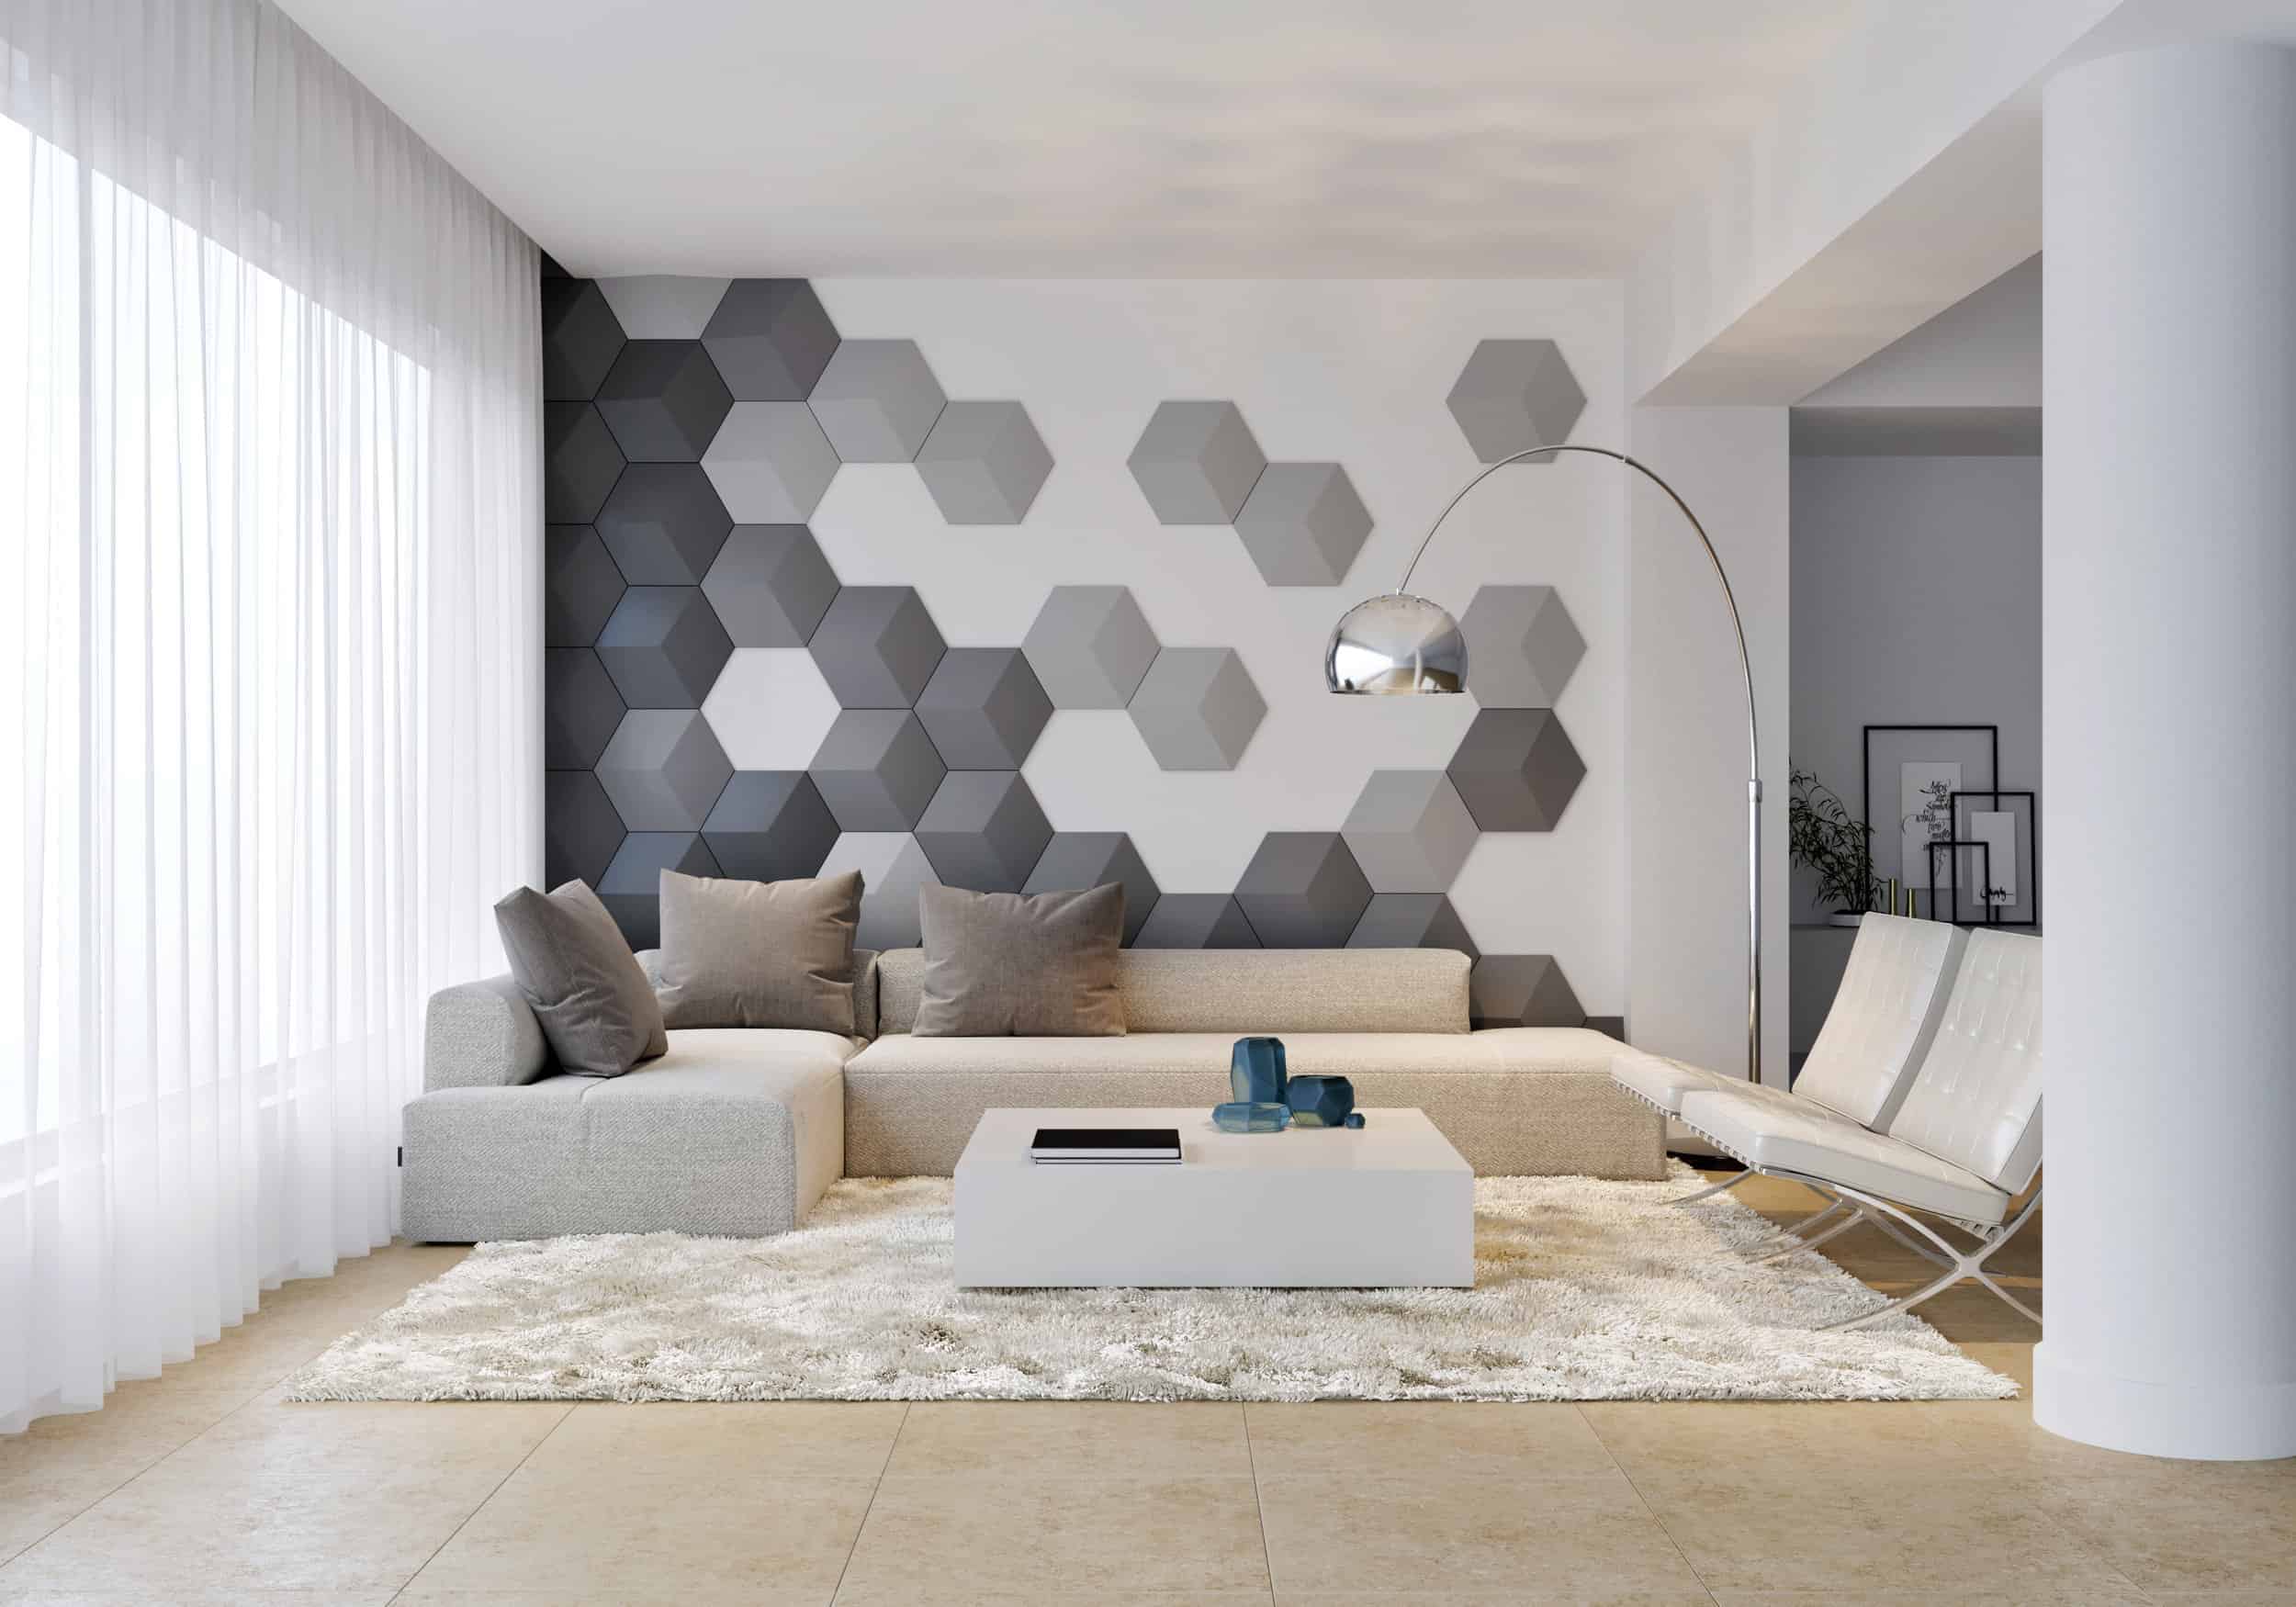 3D wall tiles design with white and grey hexagonal pattern